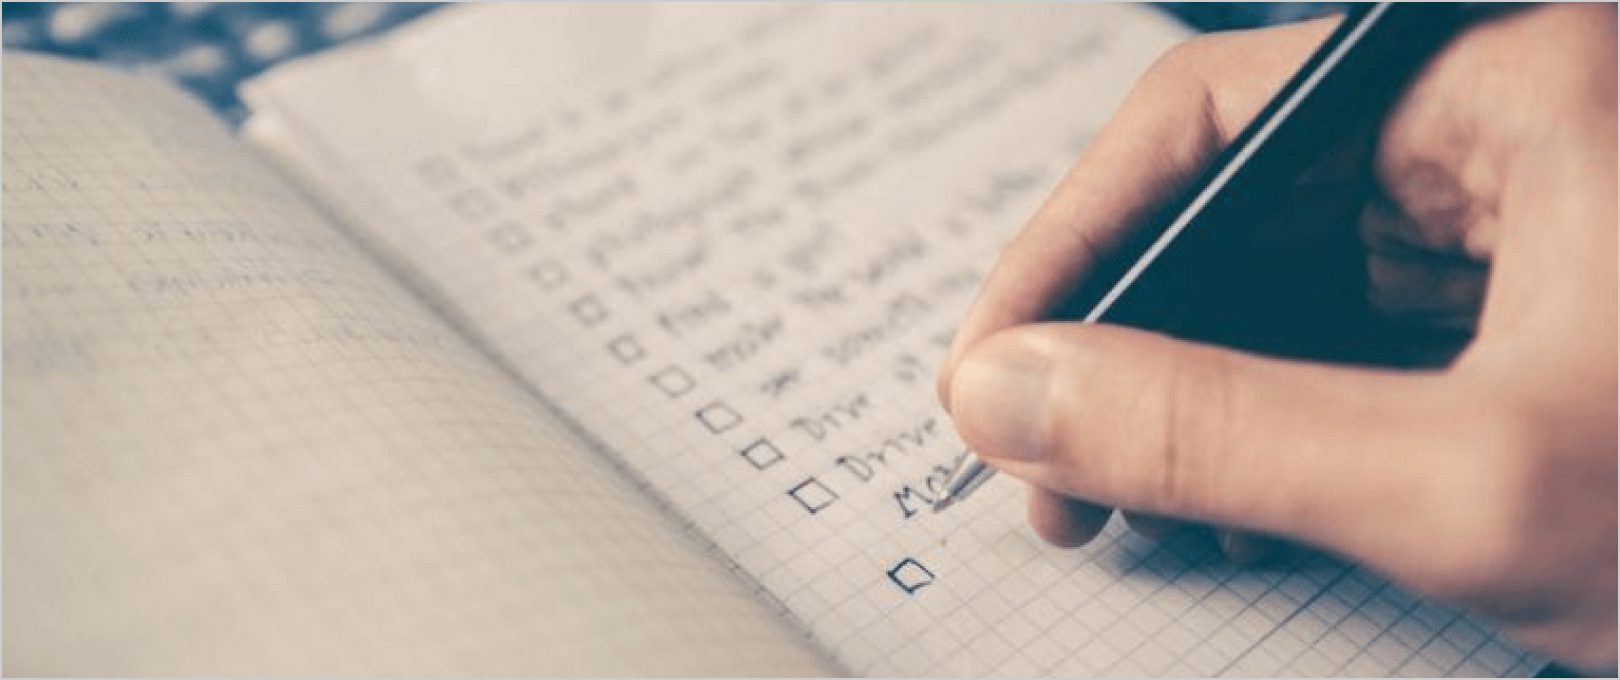 Following the WordPress Security Checklist